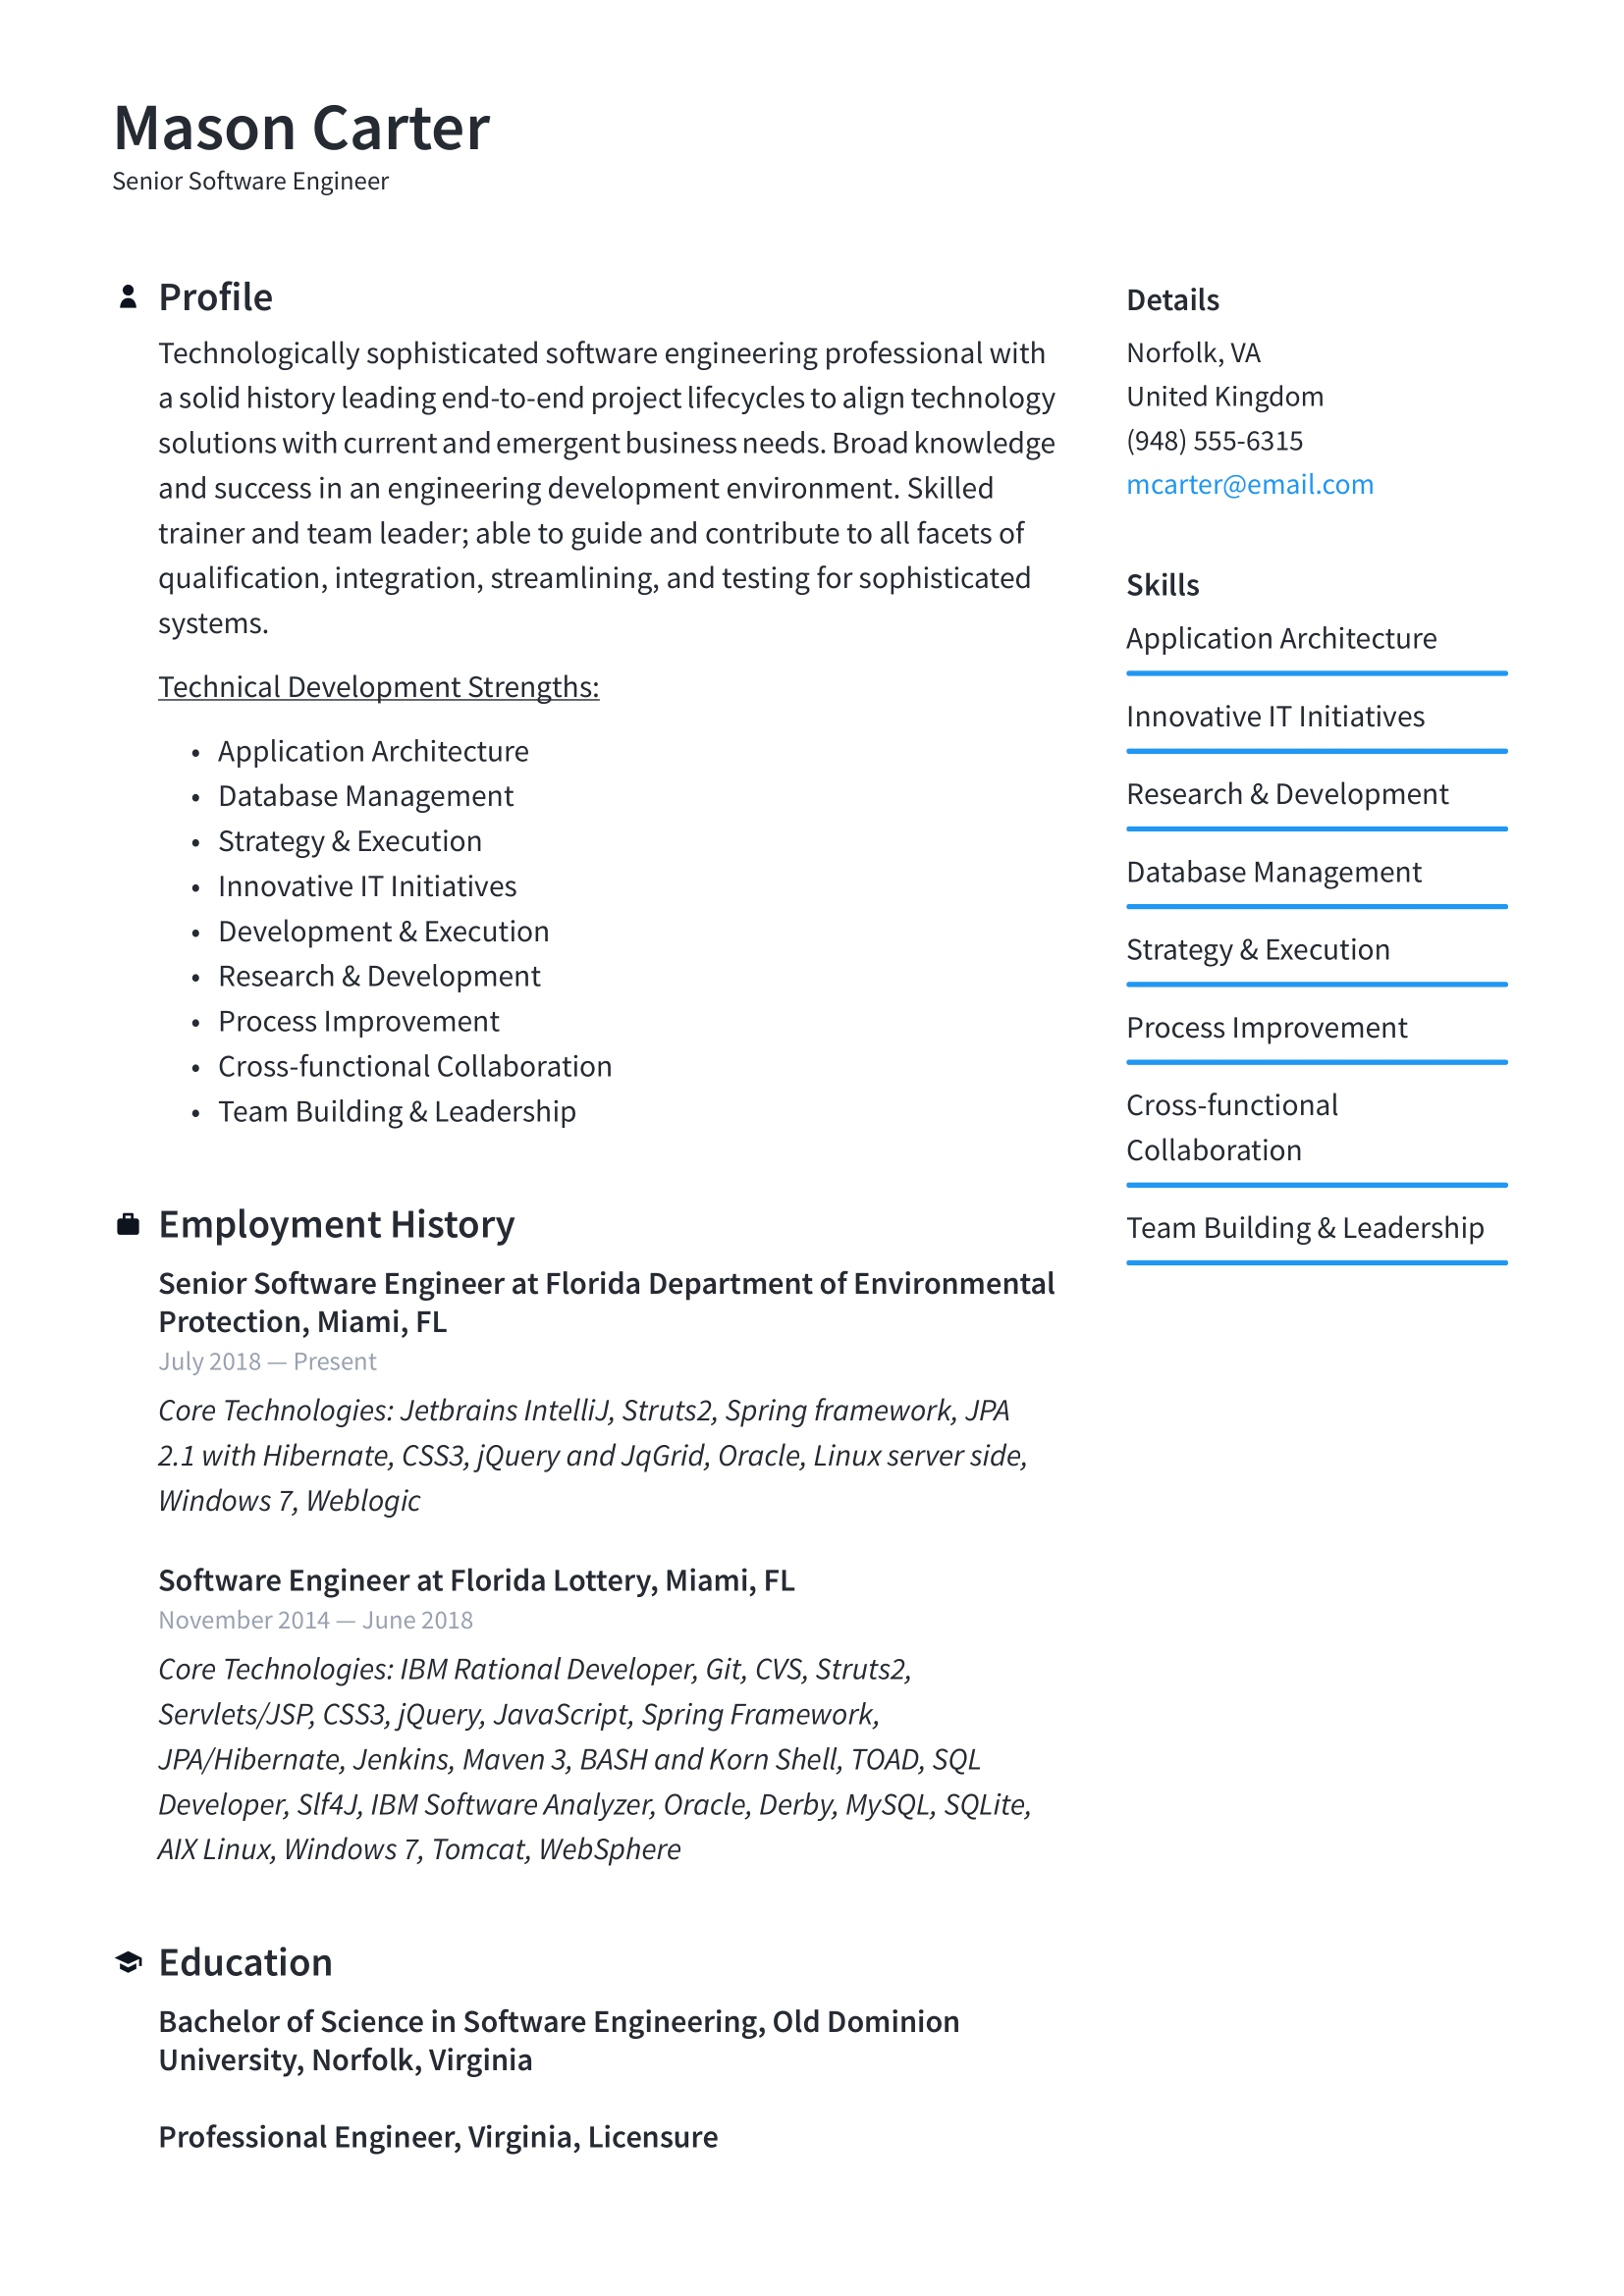 Senior Software Engineer Resume Example and Writing Guide